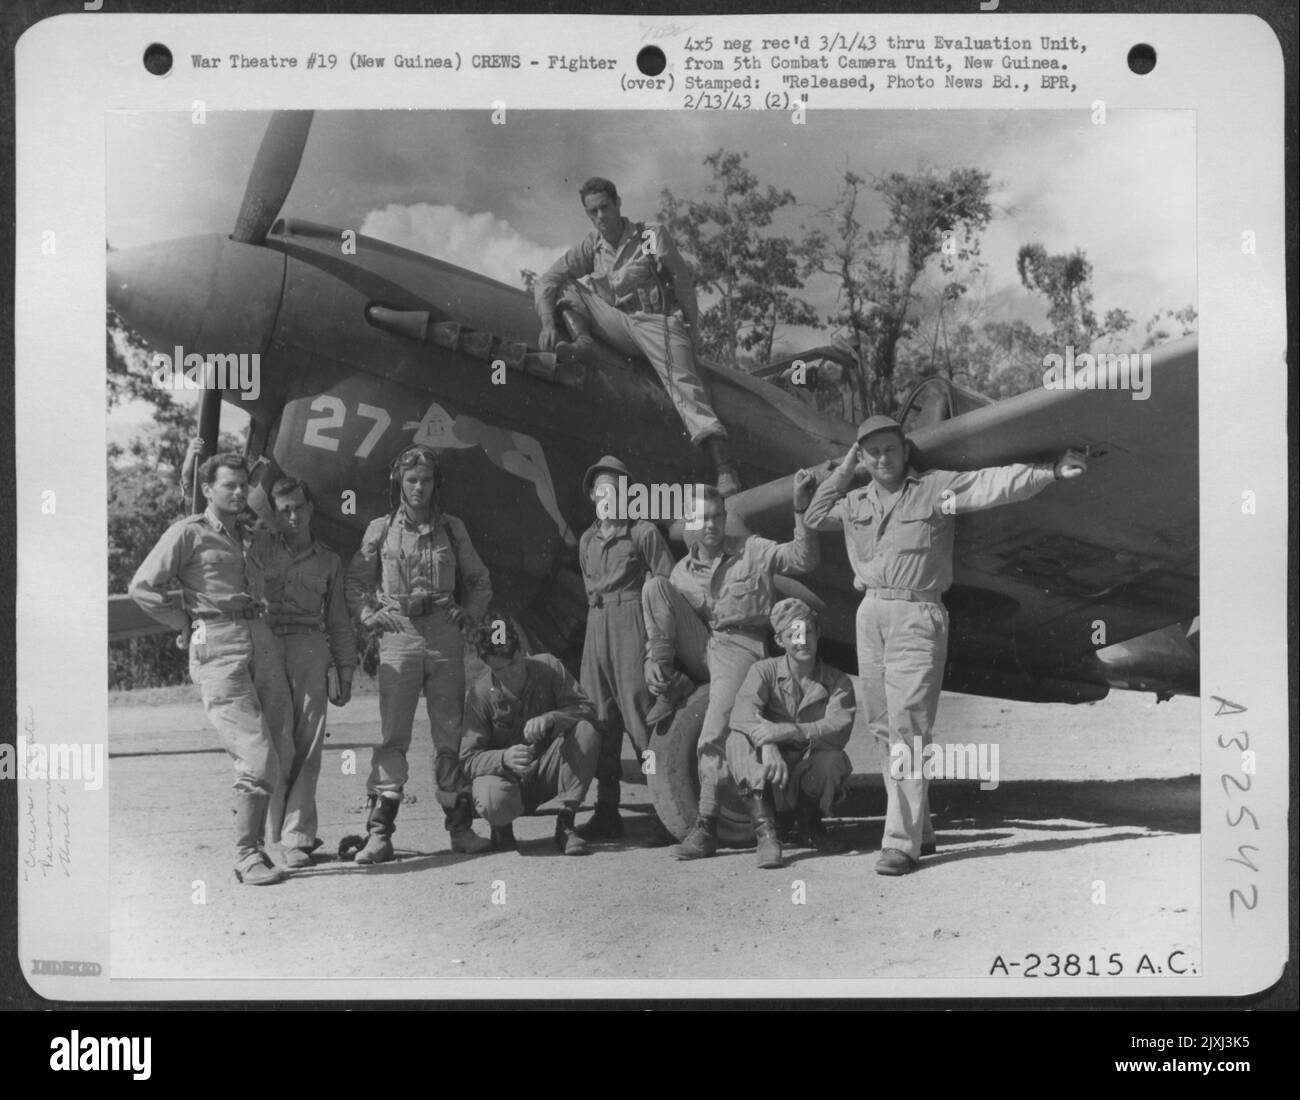 Members of the 49th Fighter Group pose beside a Curtiss P-40 at an air base in Buna, New Guinea. They are, left to right: Robert V. McHale Harry B. Dillworth Joe King Lucius D. LaCroix Arland Stanton Clyde Knisley Paul J. Slocum David Baker Stock Photo